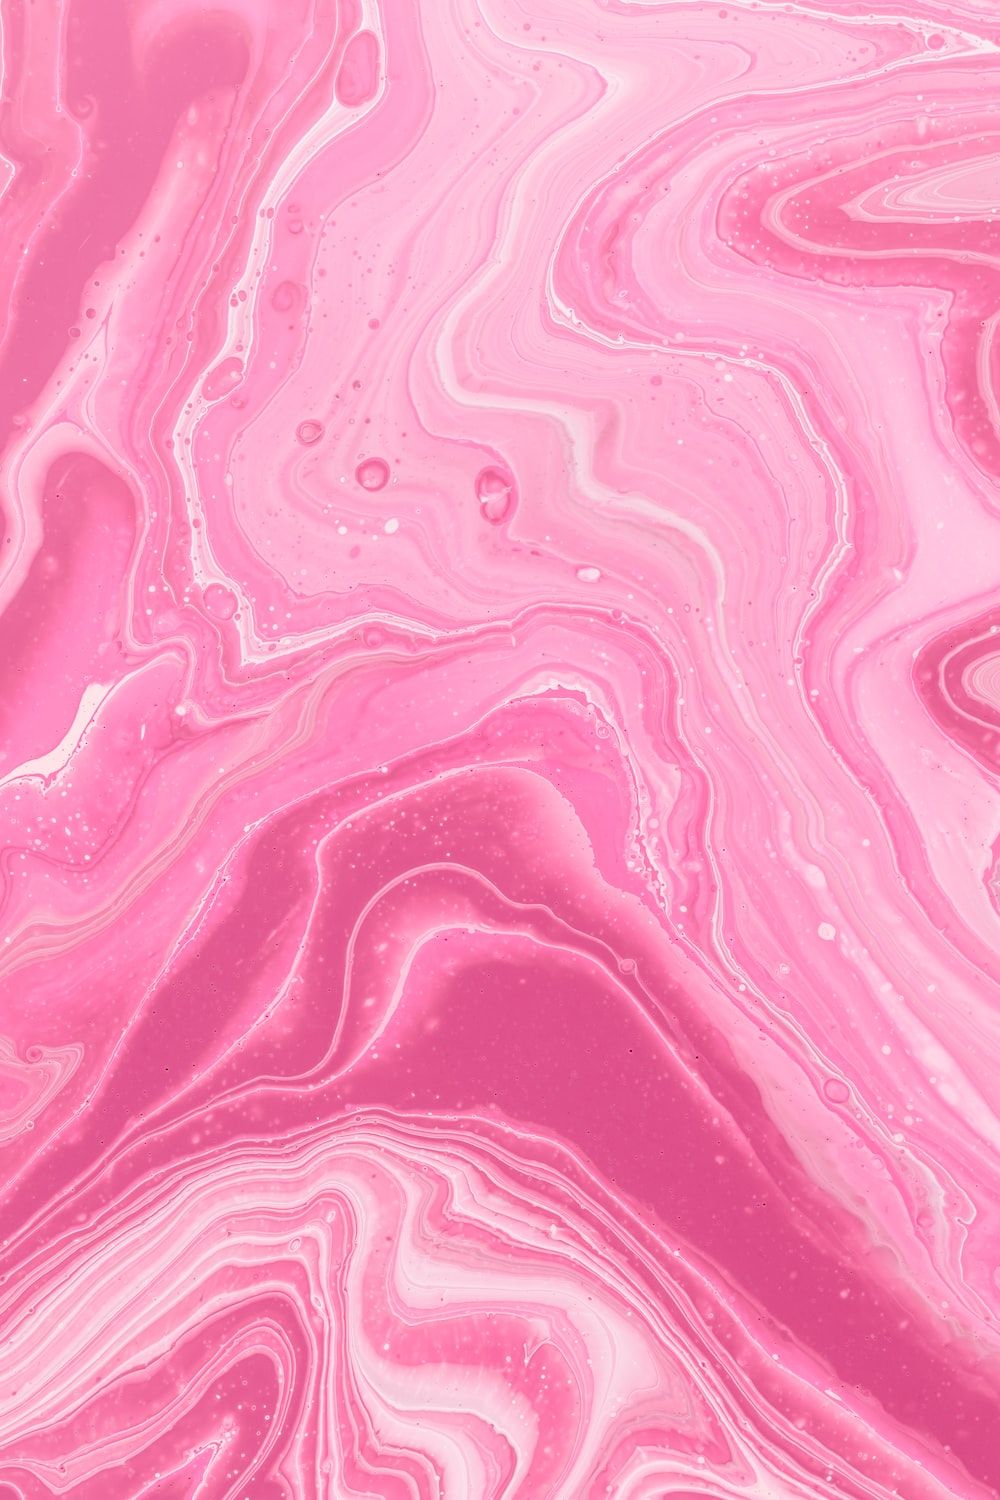 A pink and white marbled background - Pink, hot pink, slime, candy, pastel pink, pattern